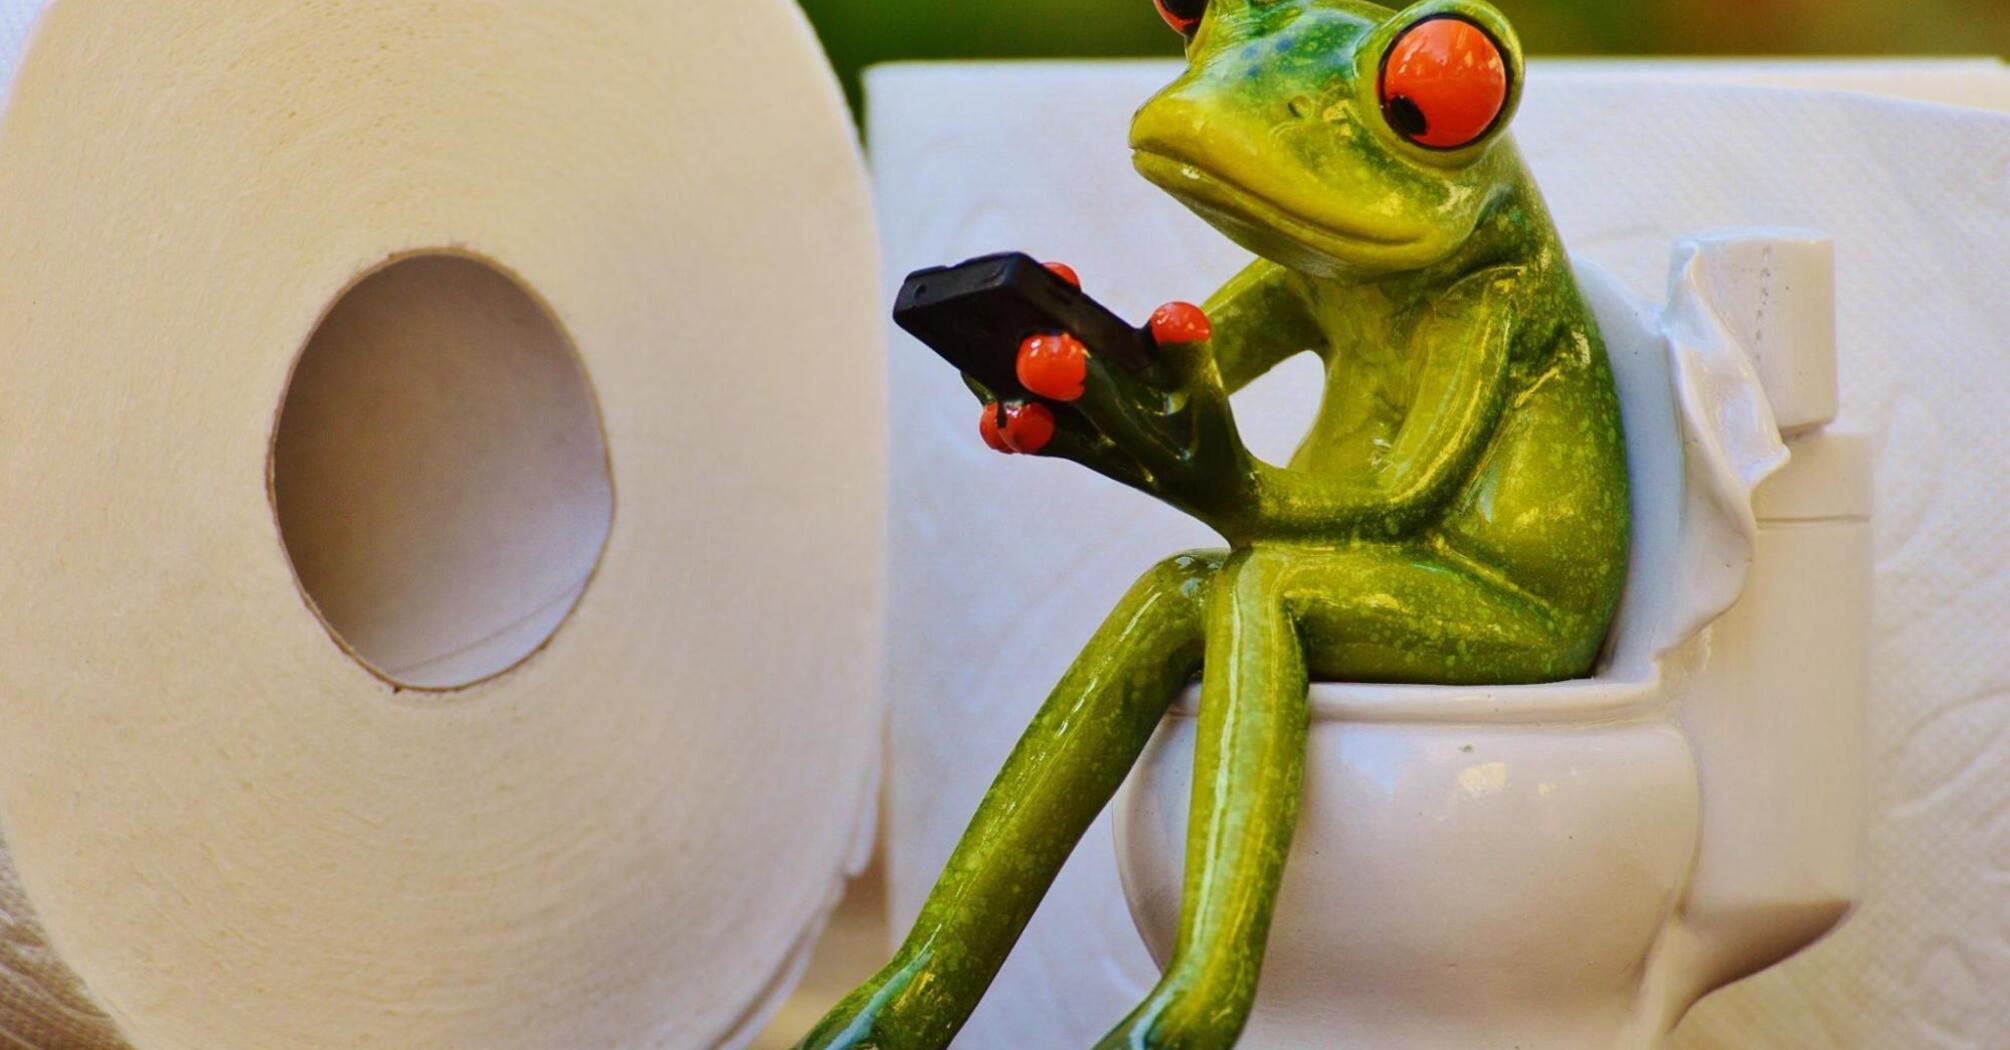 Frog sitting on the toilet with a phone